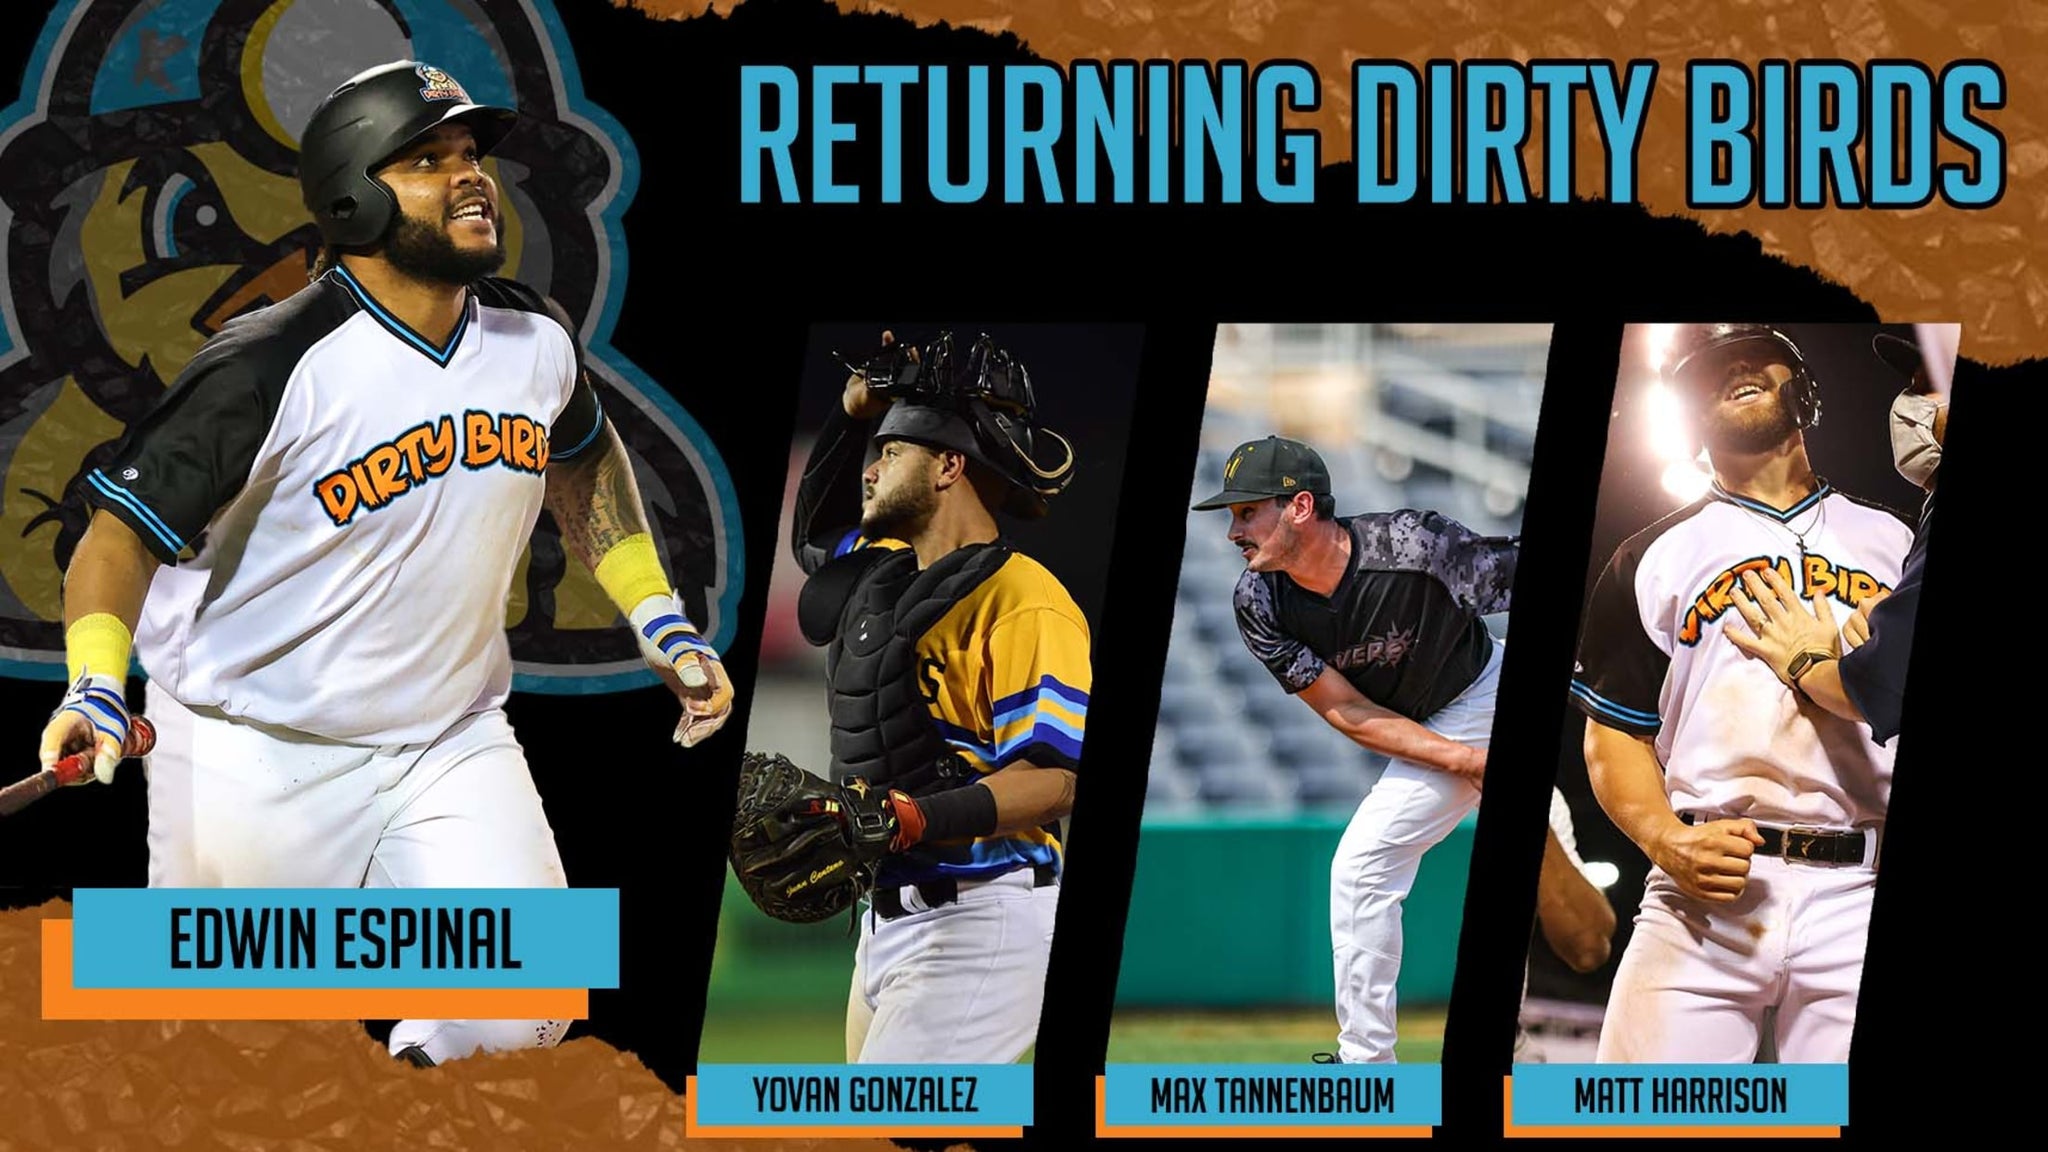 EDWIN ESPINAL HEADLINES FIRST WAVE OF 2022 DIRTY BIRDS’ ROSTER